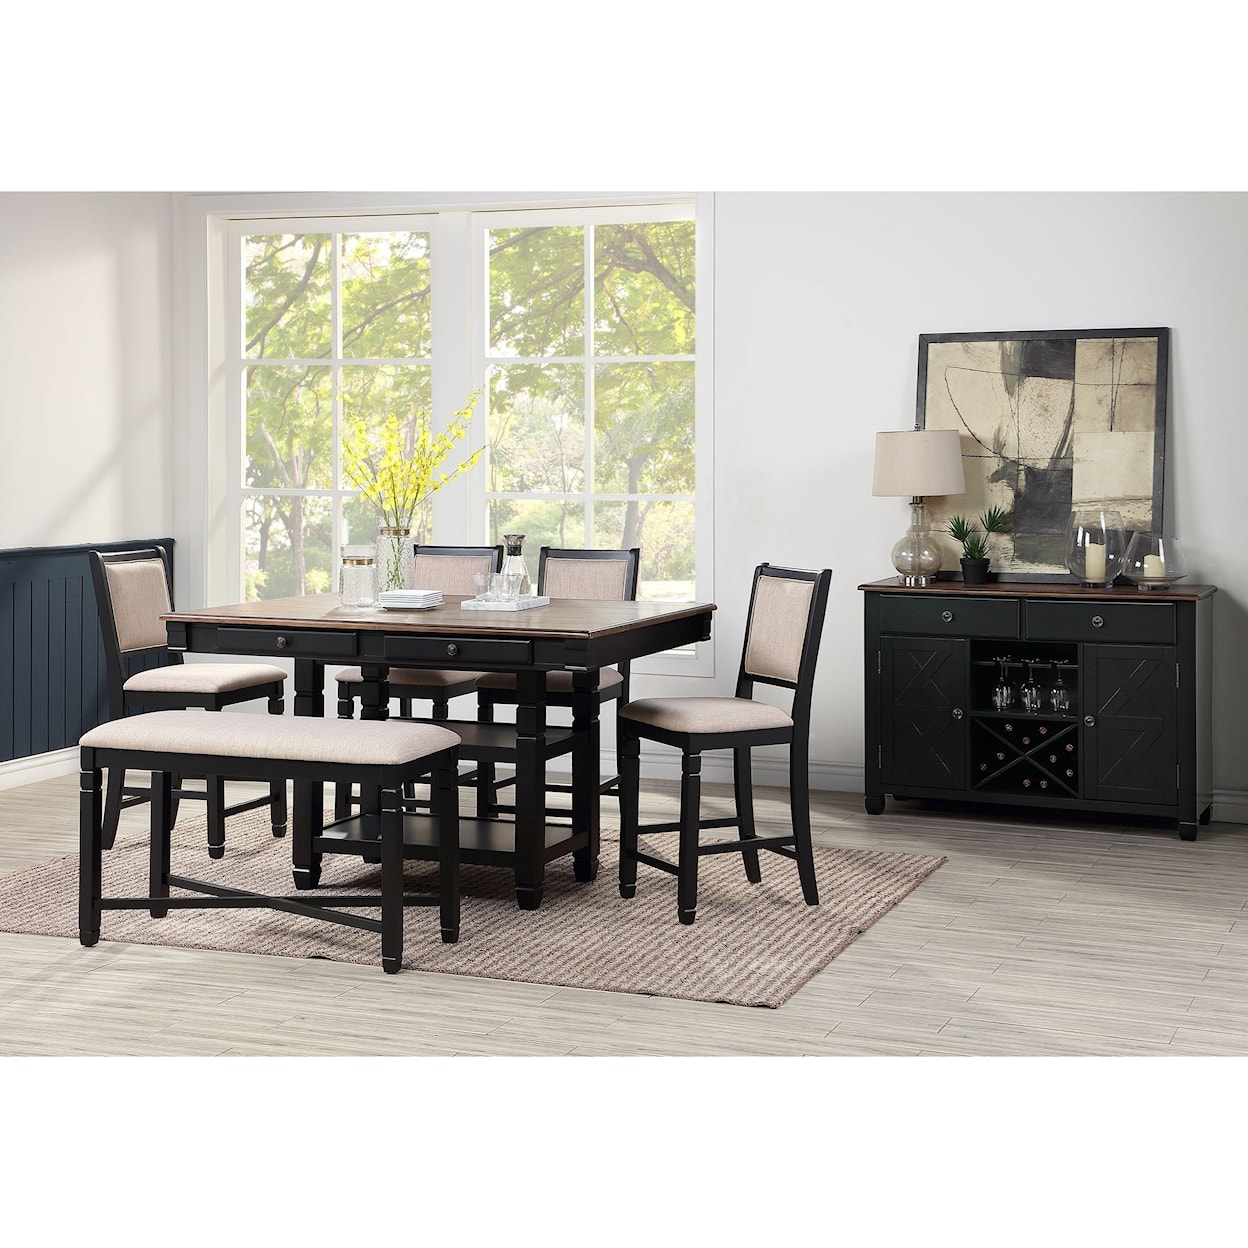 New Classic Furniture Prairie Point Dining Room Group